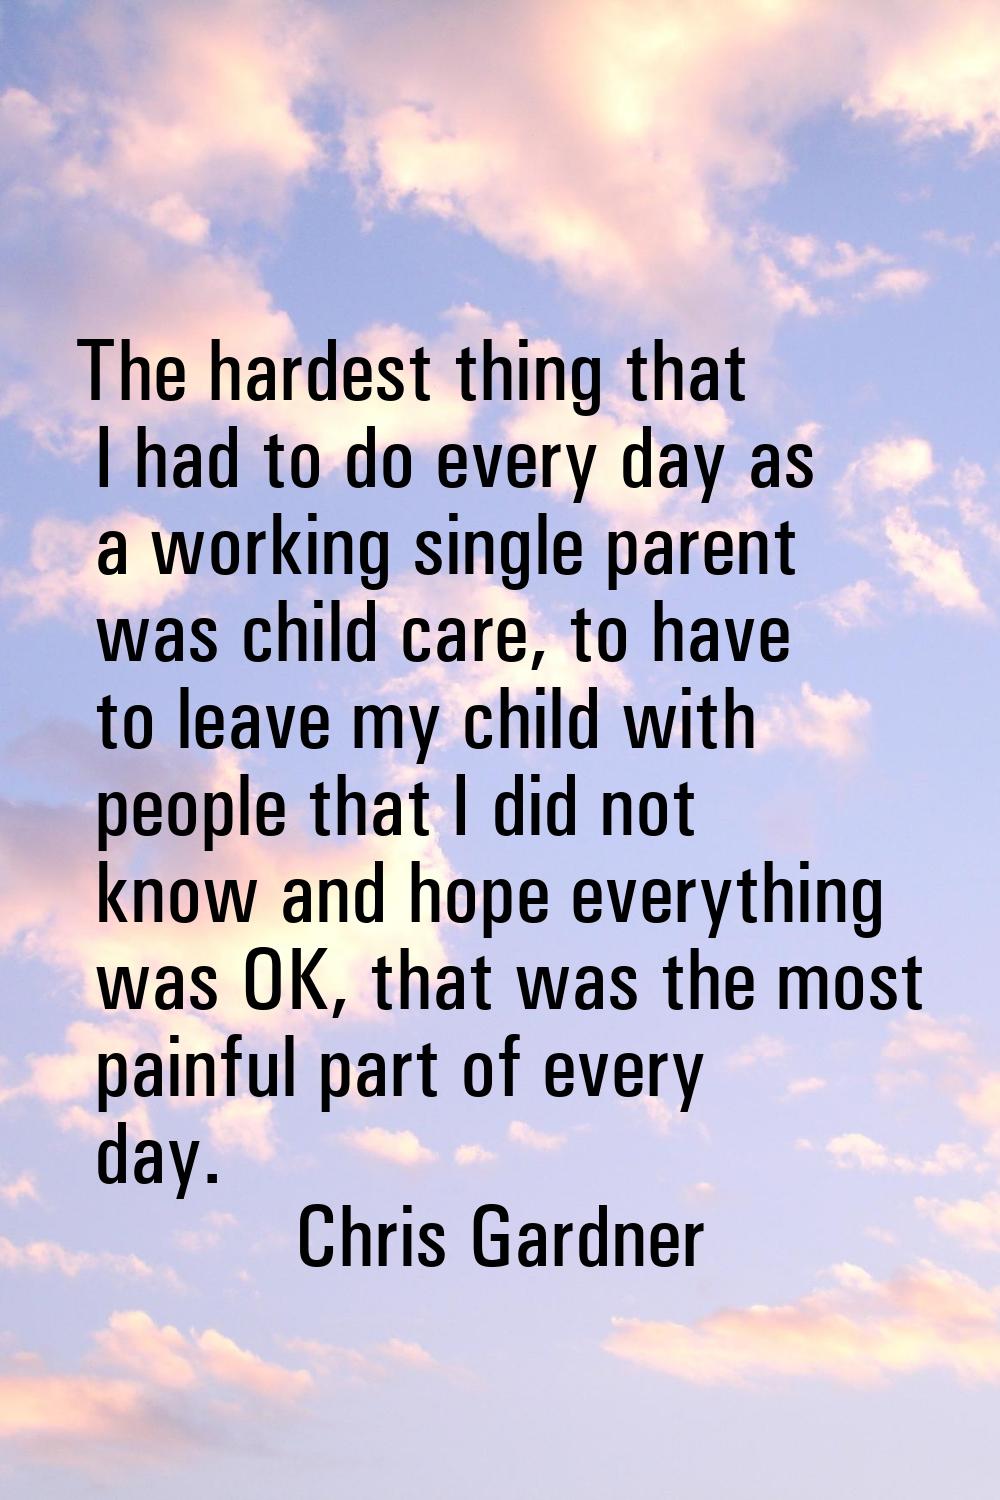 The hardest thing that I had to do every day as a working single parent was child care, to have to 